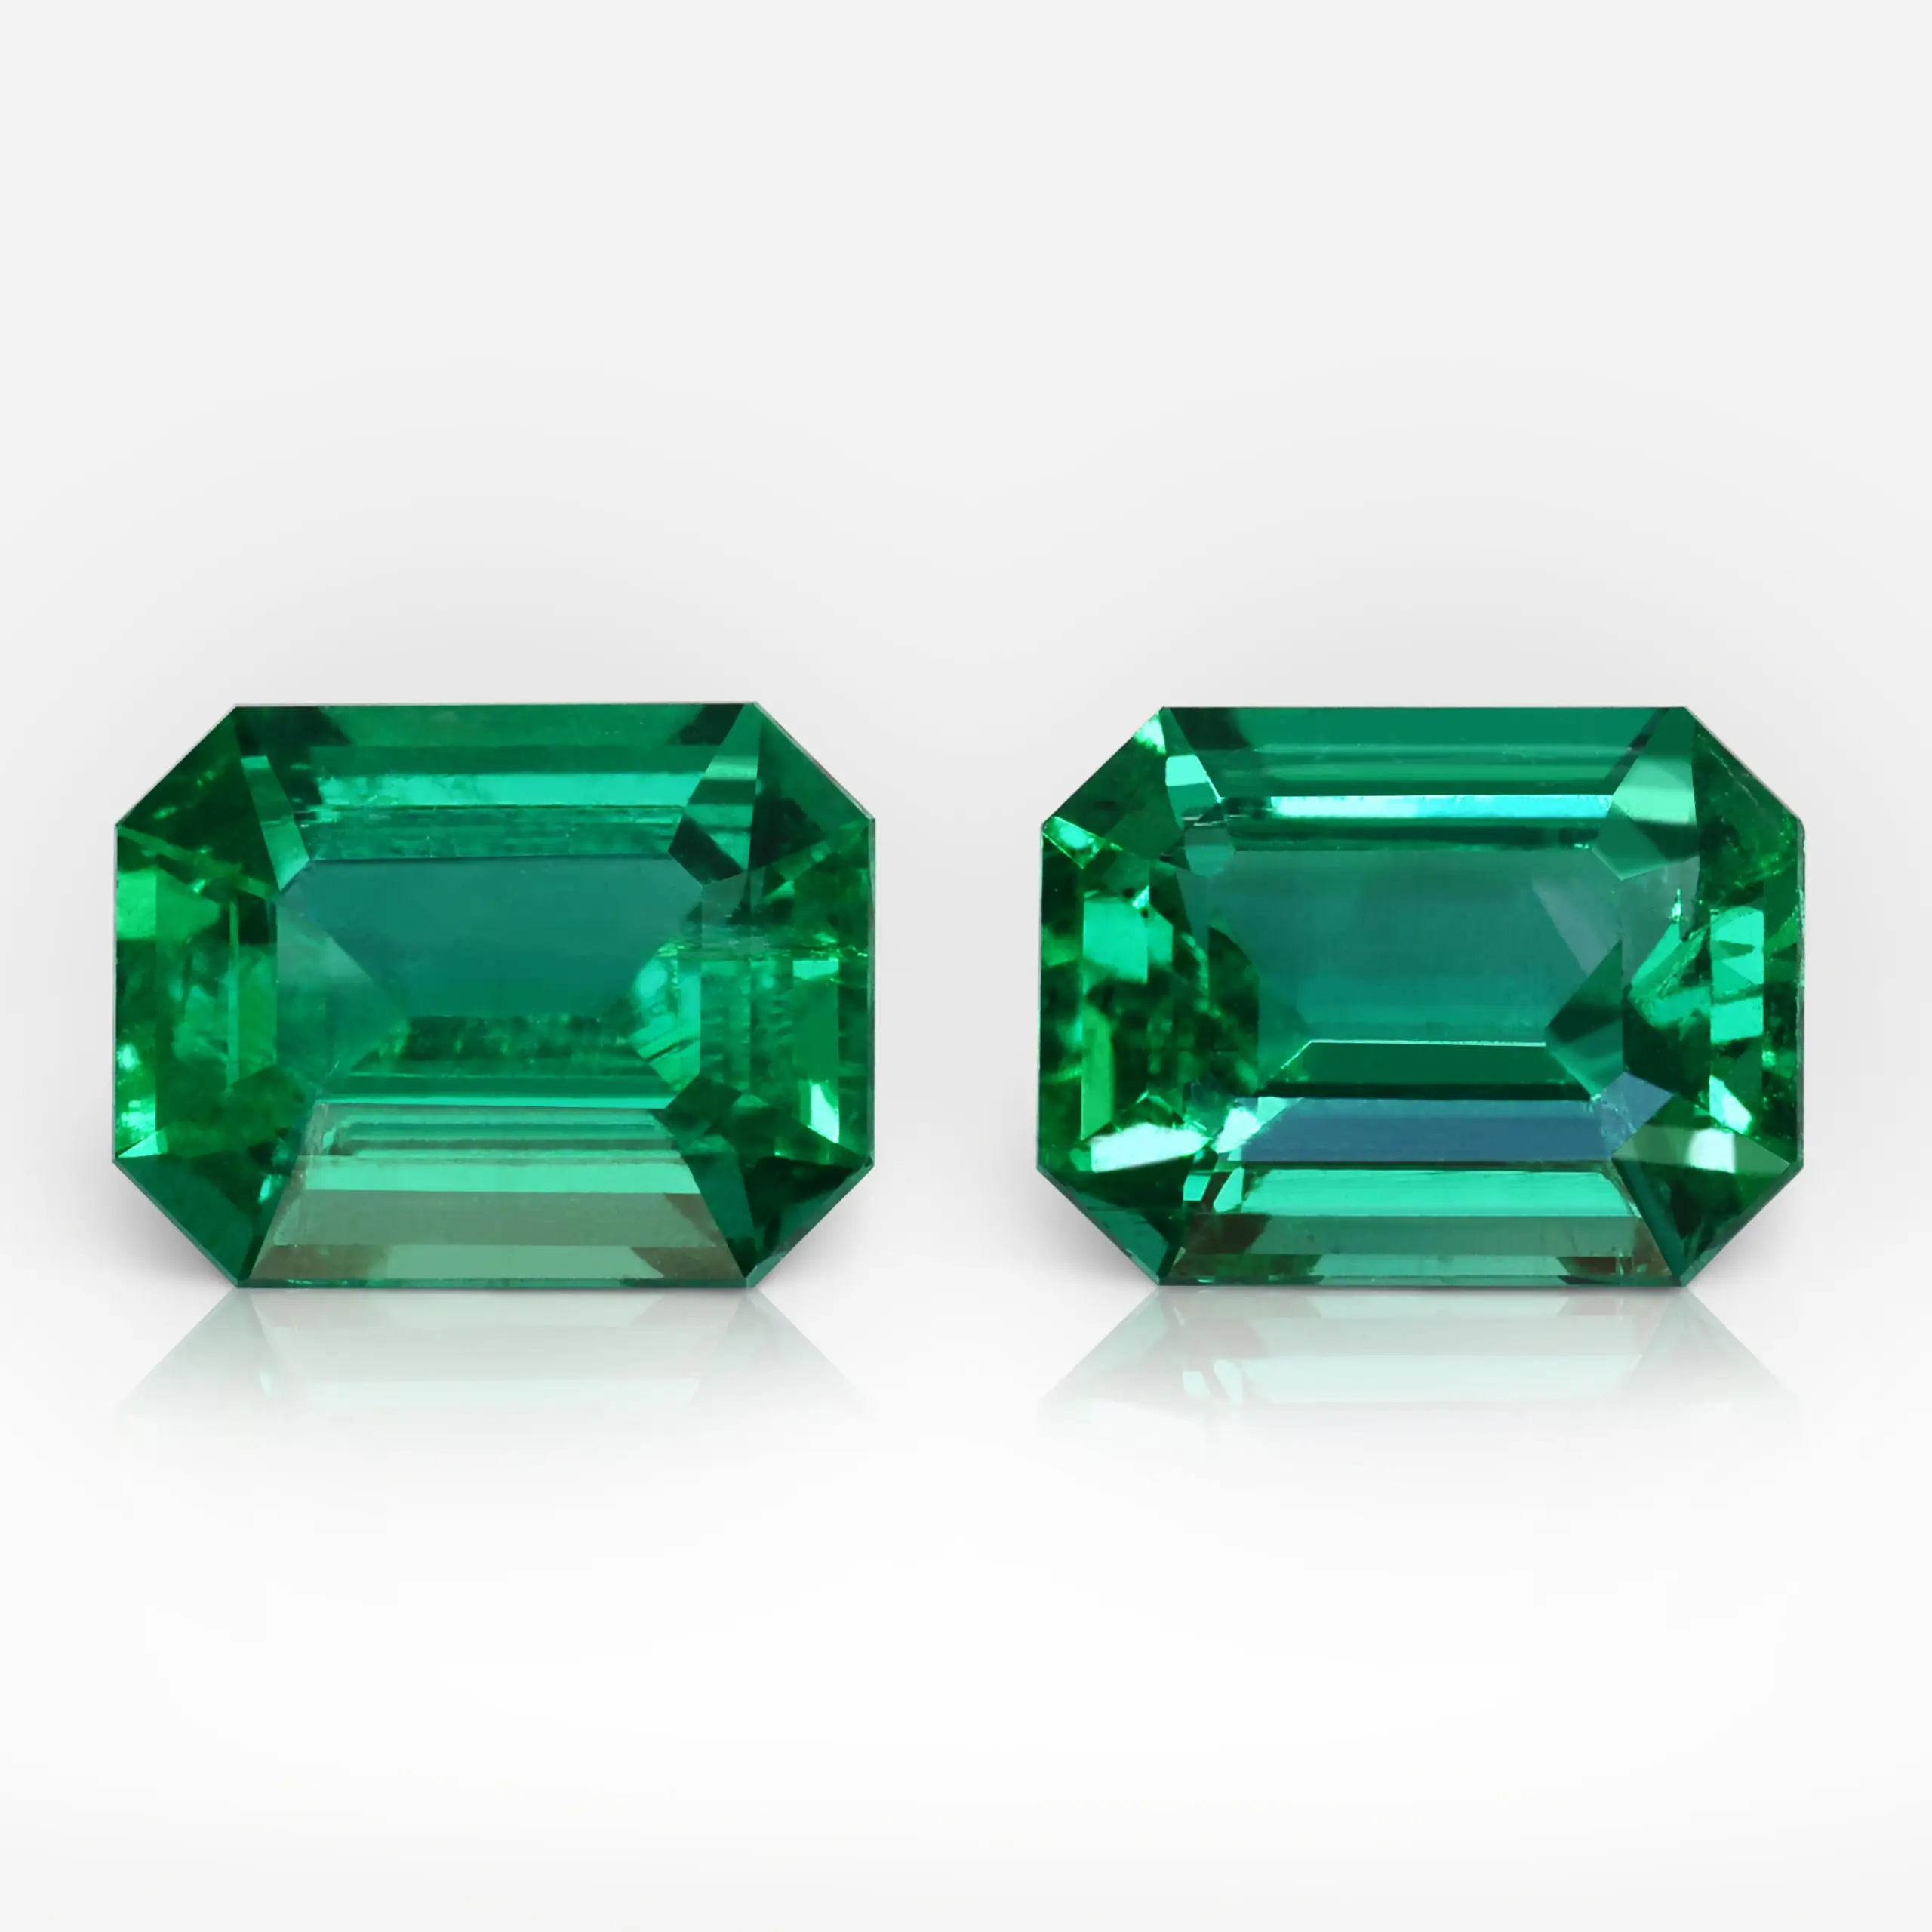 1.69 and 1.77 carat Pair of Green Emerald Shape Zambian Emerald - picture 1